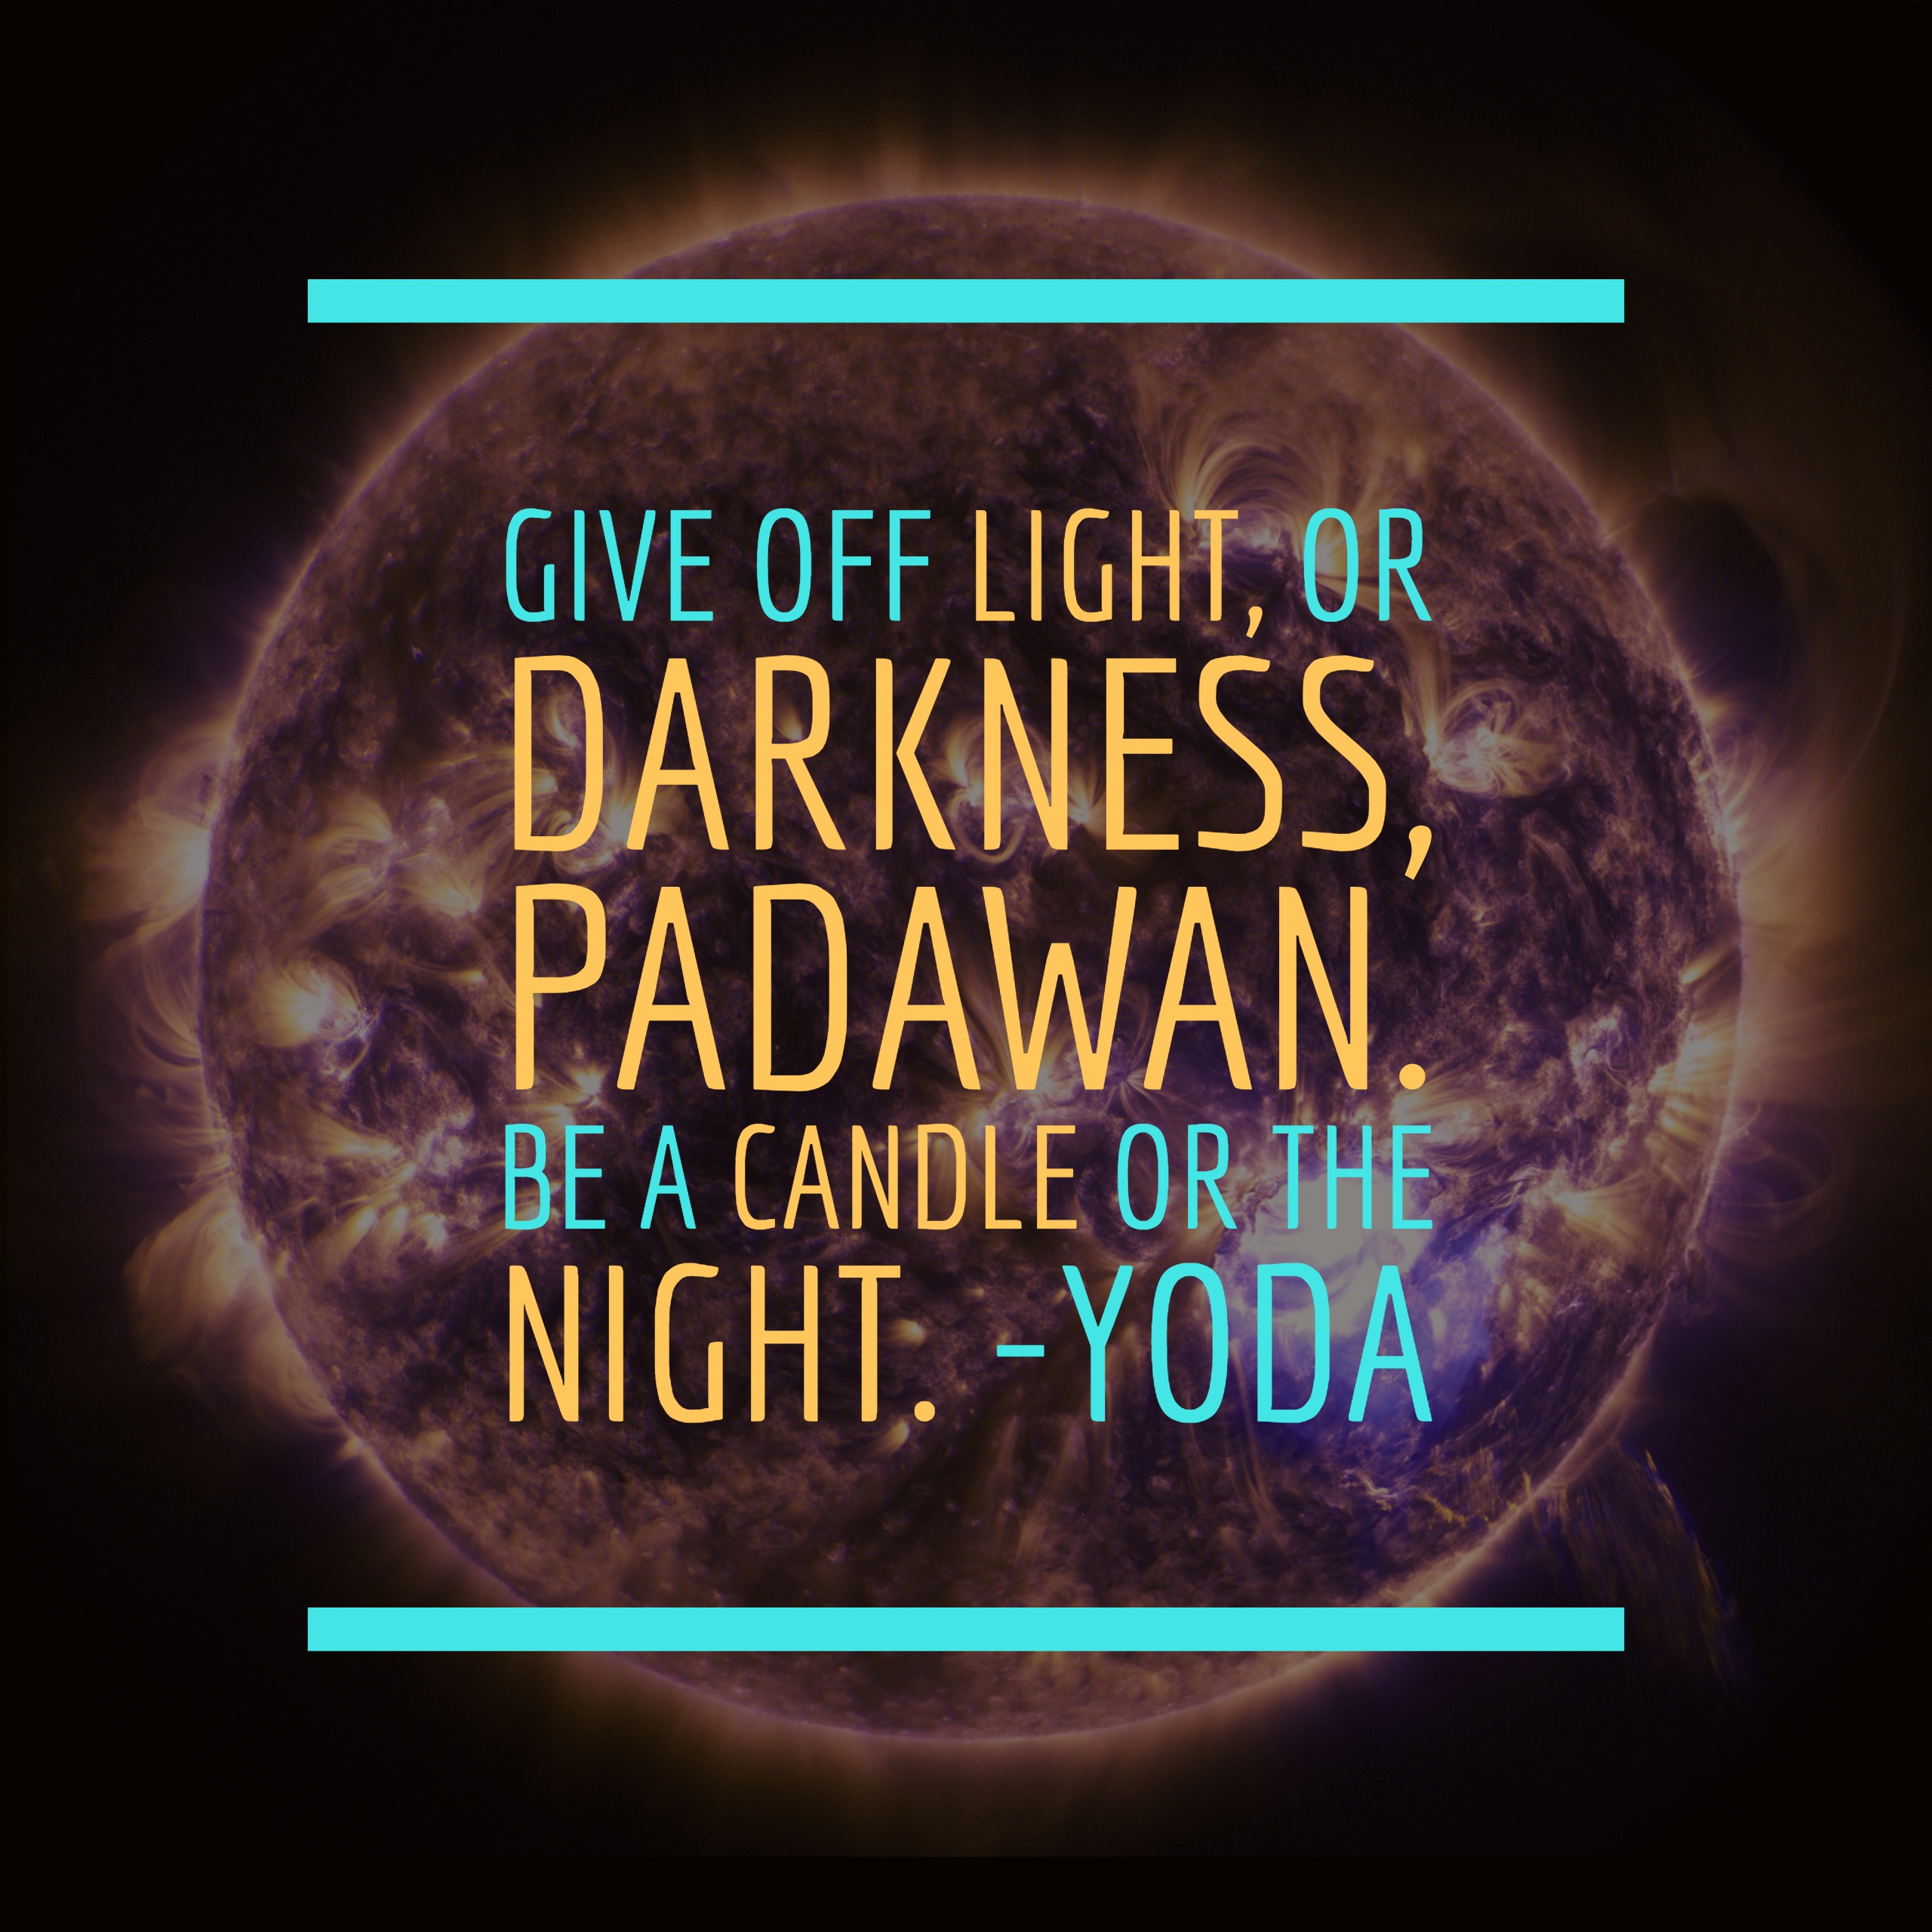 Give off light, or darkness, Padawan. Be a candle or the night. -Yoda